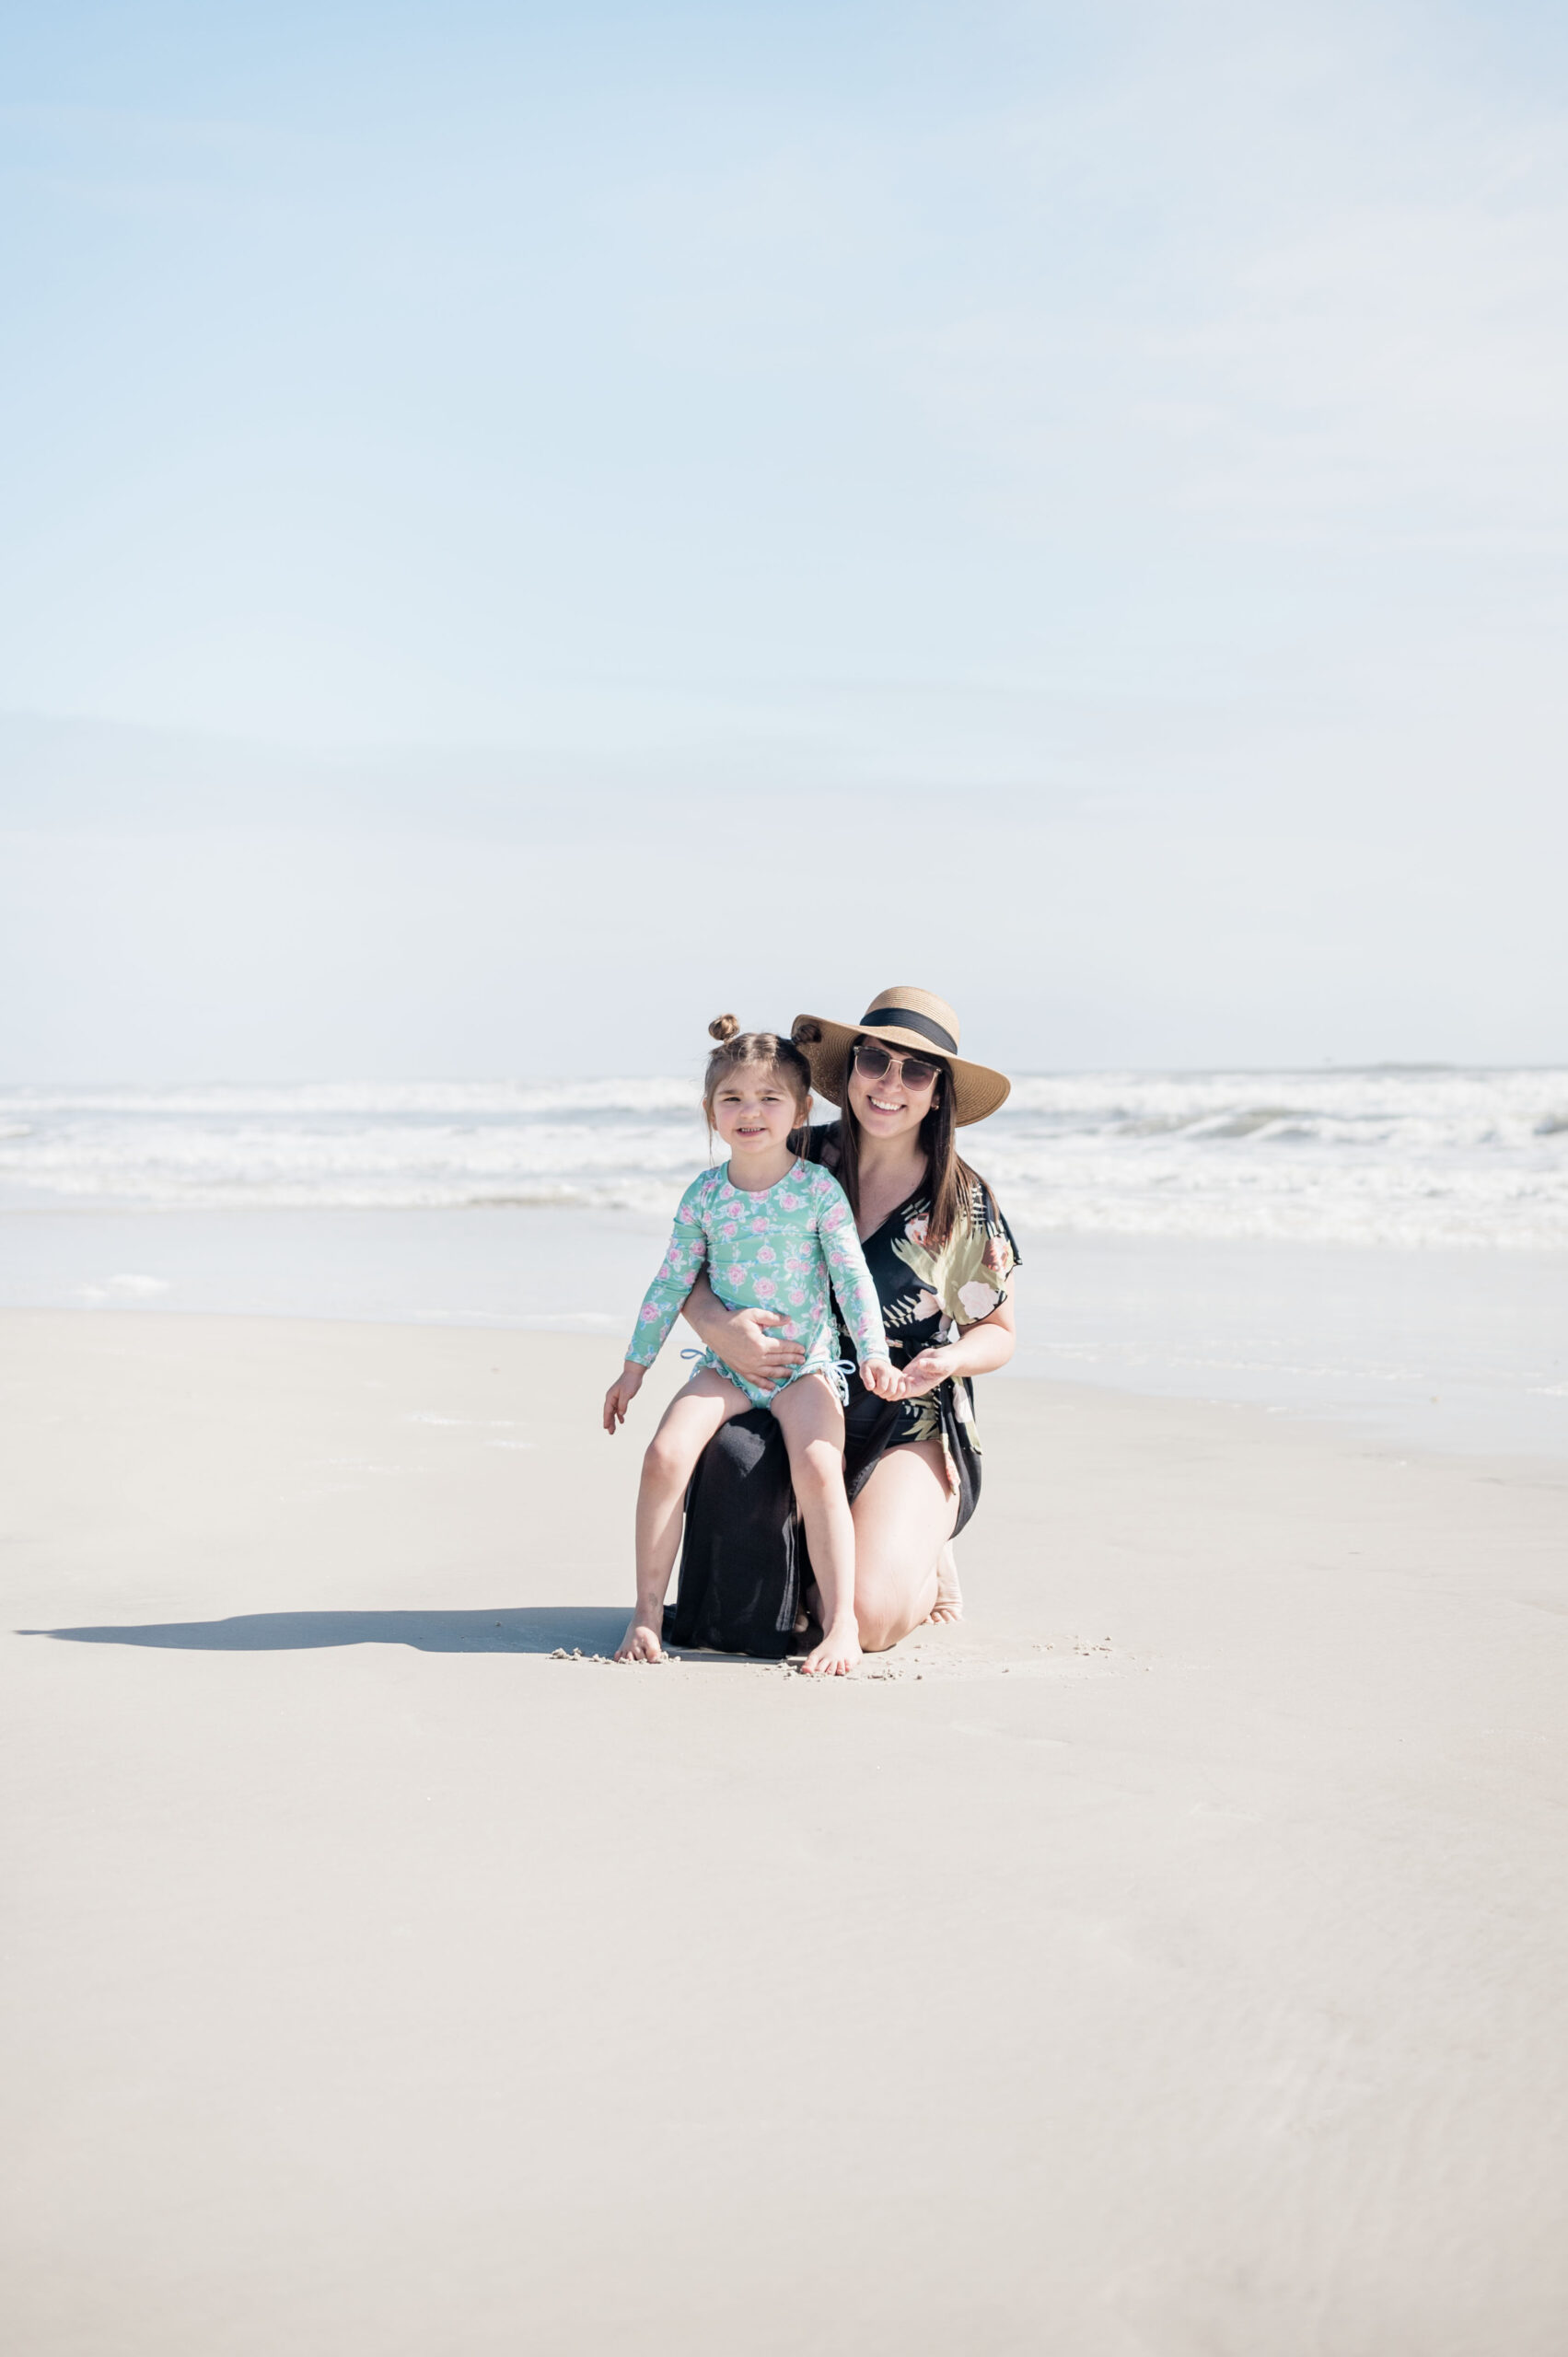 Brittney Naylor and daughter posing together on the beach in saint augustine with the waves in the background